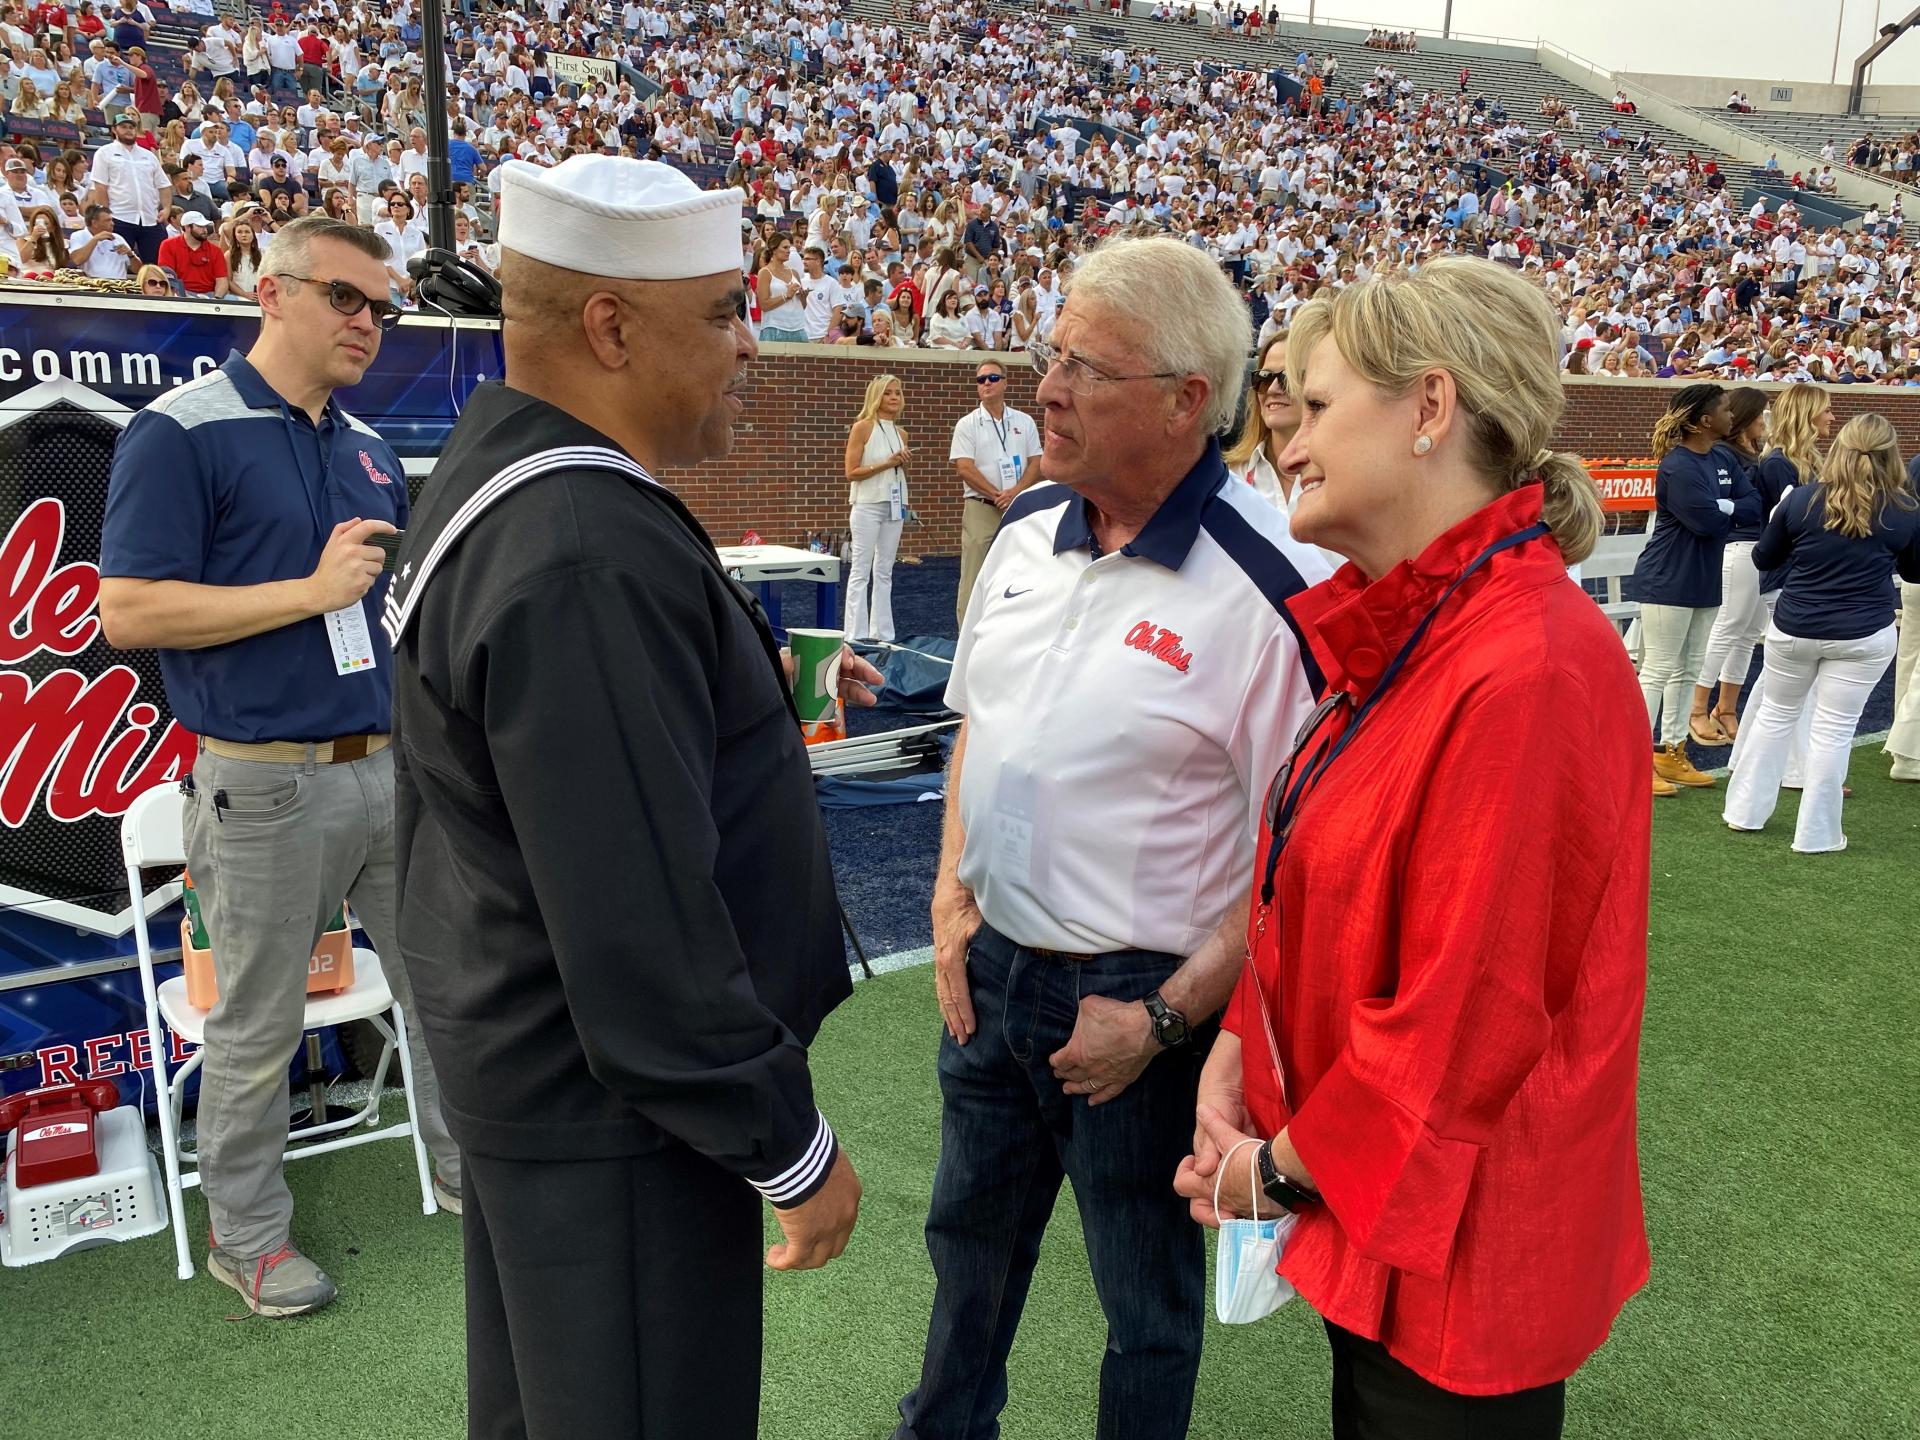 Senators Hyde-Smith and Roger Wicker visit first responders prior to an Ole Miss commemoration marking the 20th anniversary of the 9/11 terrorist attacks on the United States. (Sept. 11, 2021)